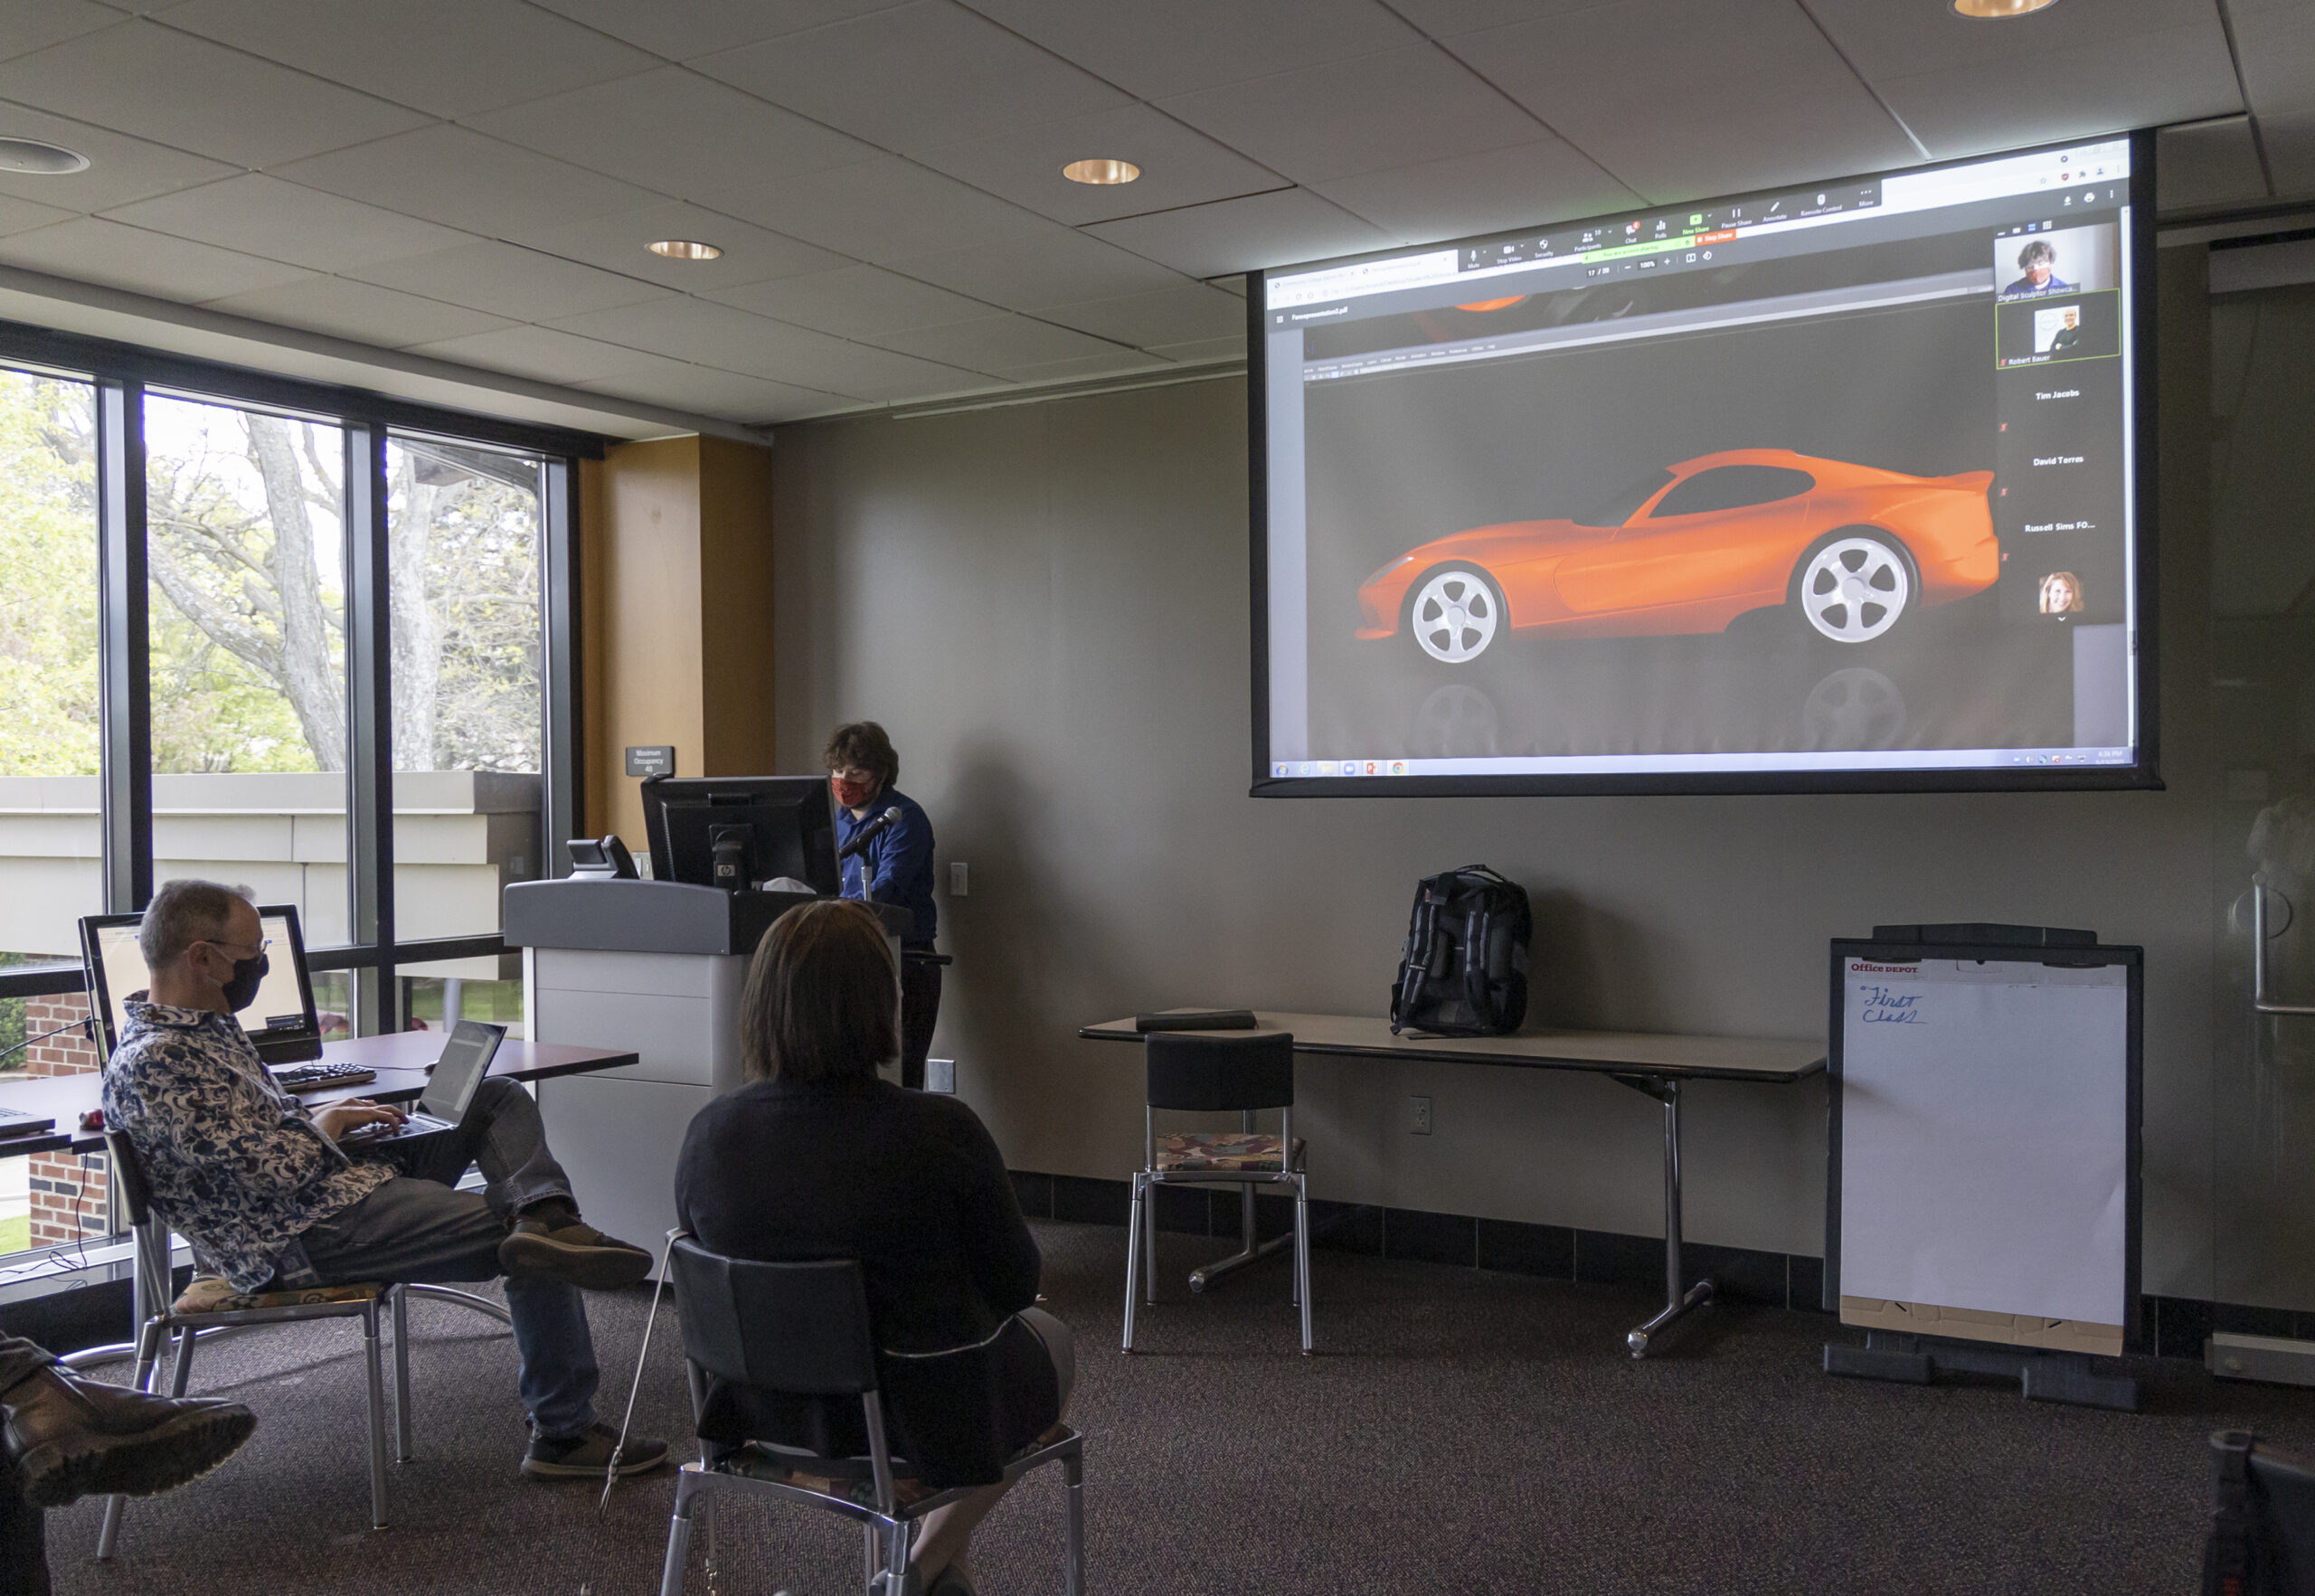 classroom projector displaying a car